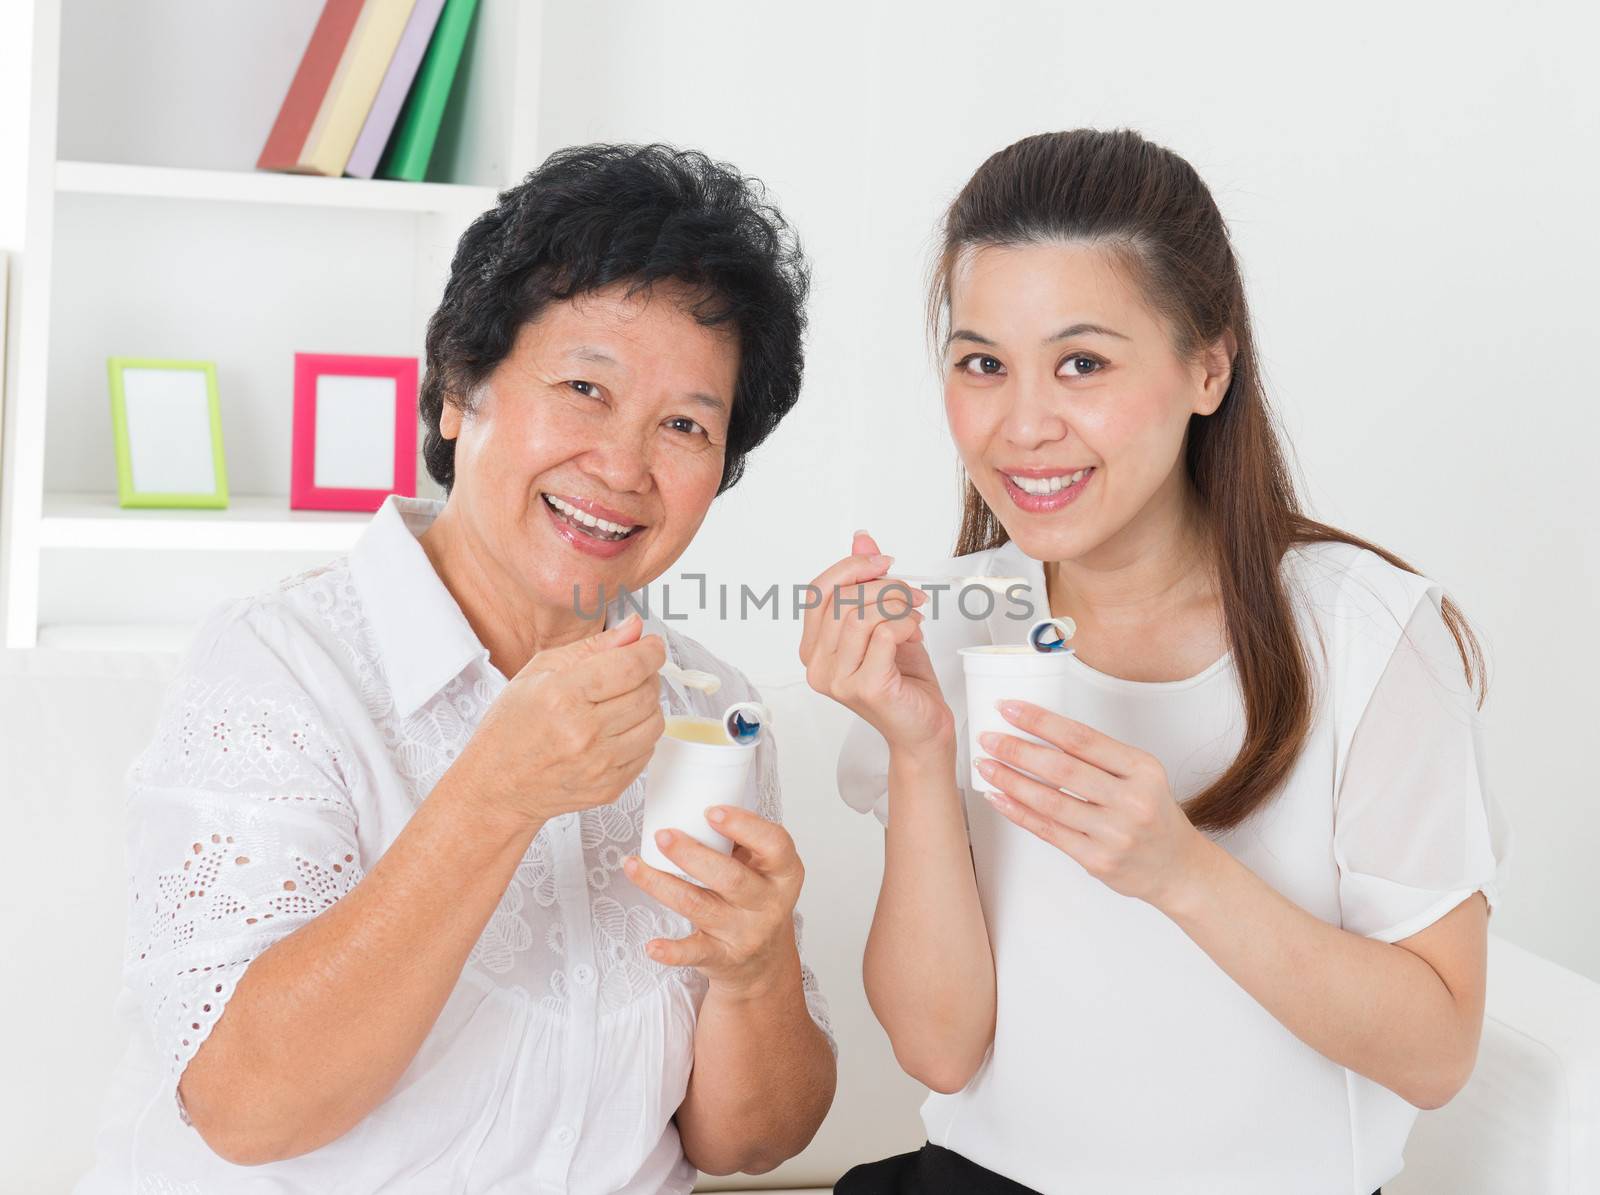 Eating yogurt. Happy Asian family eating yoghurt at home. Beautiful senior mother and adult daughter, healthcare concept.